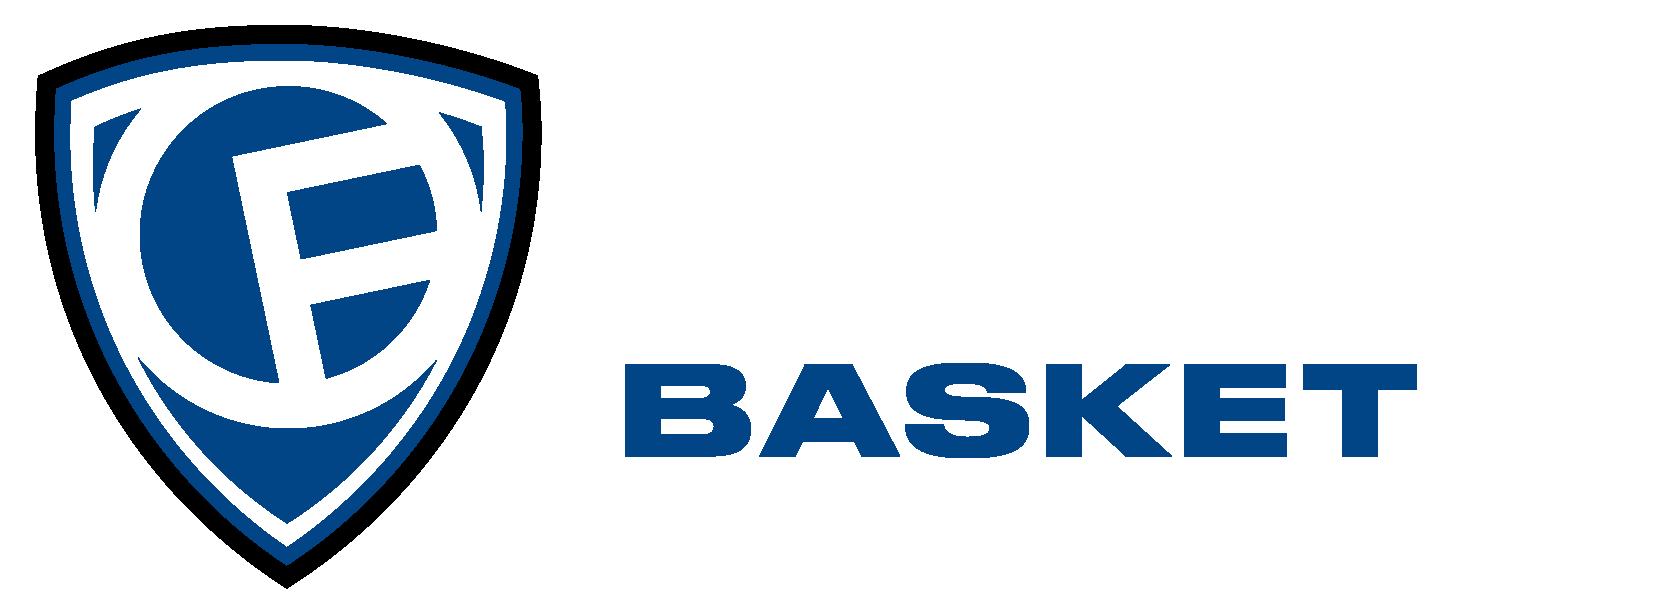 Fribourg Olympic Basket